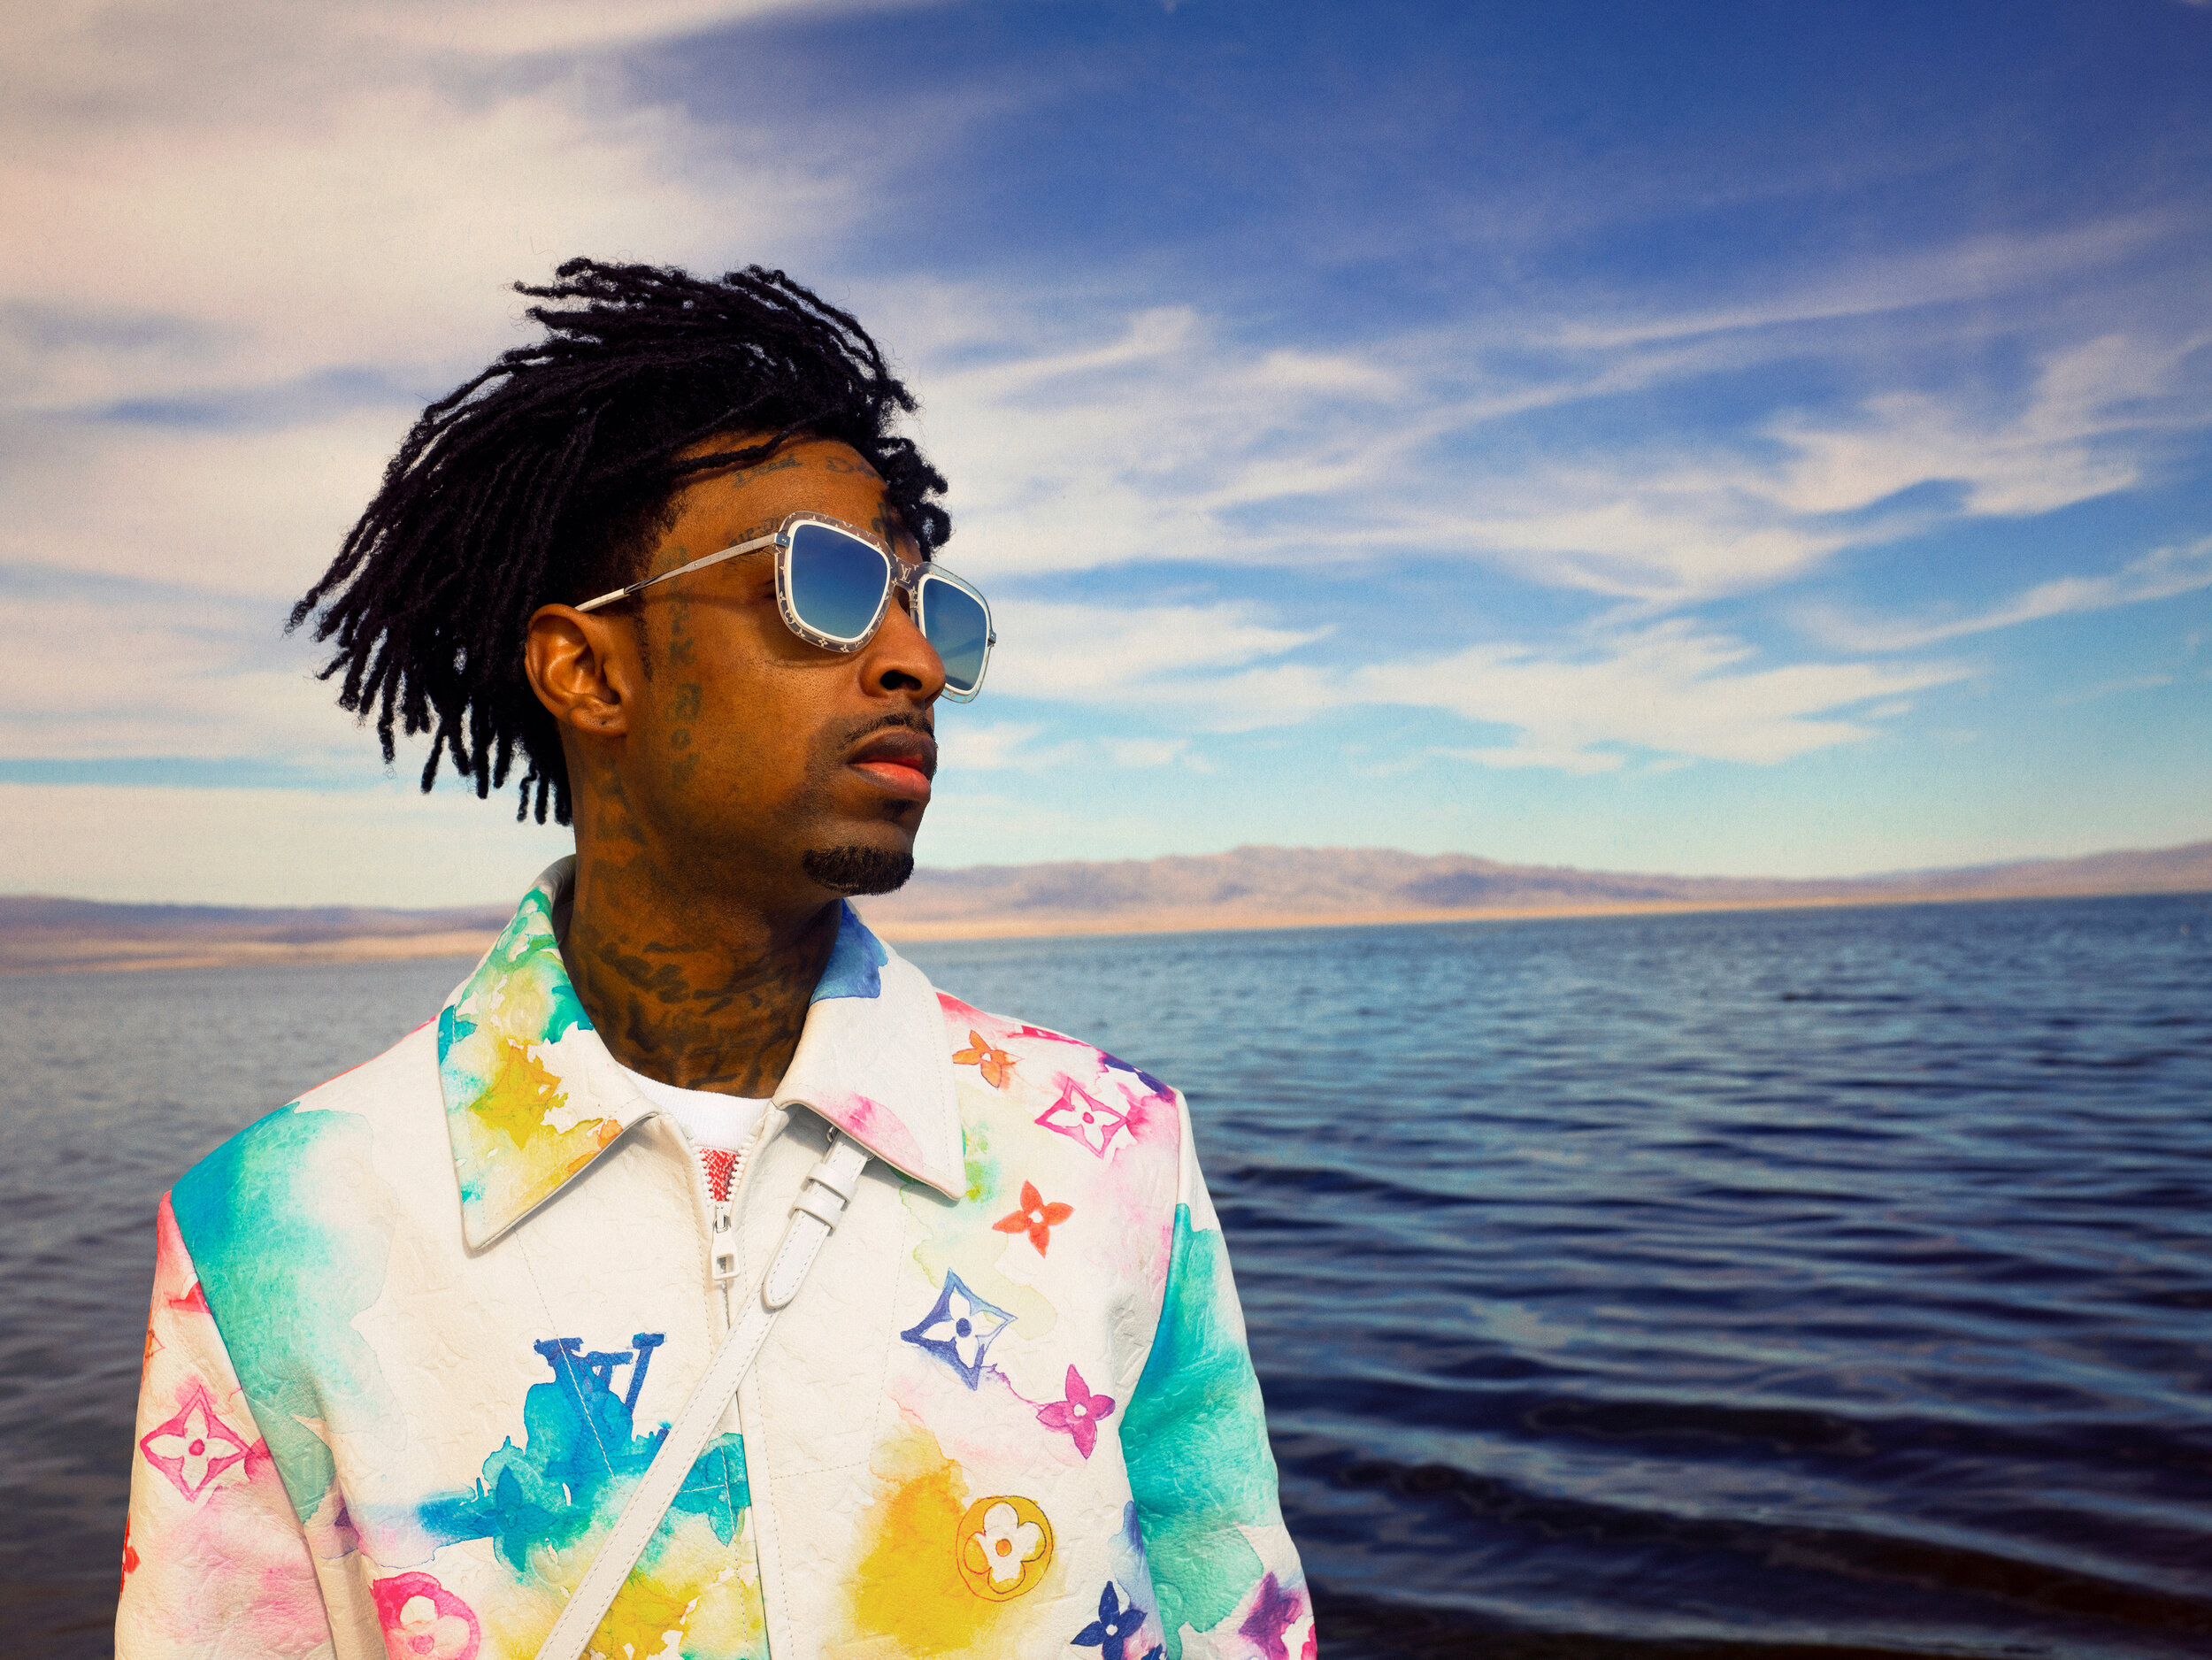 Louis Vuitton Summer 2021 by Virgil Abloh featuring 21 Savage, Magazine, HYPEND